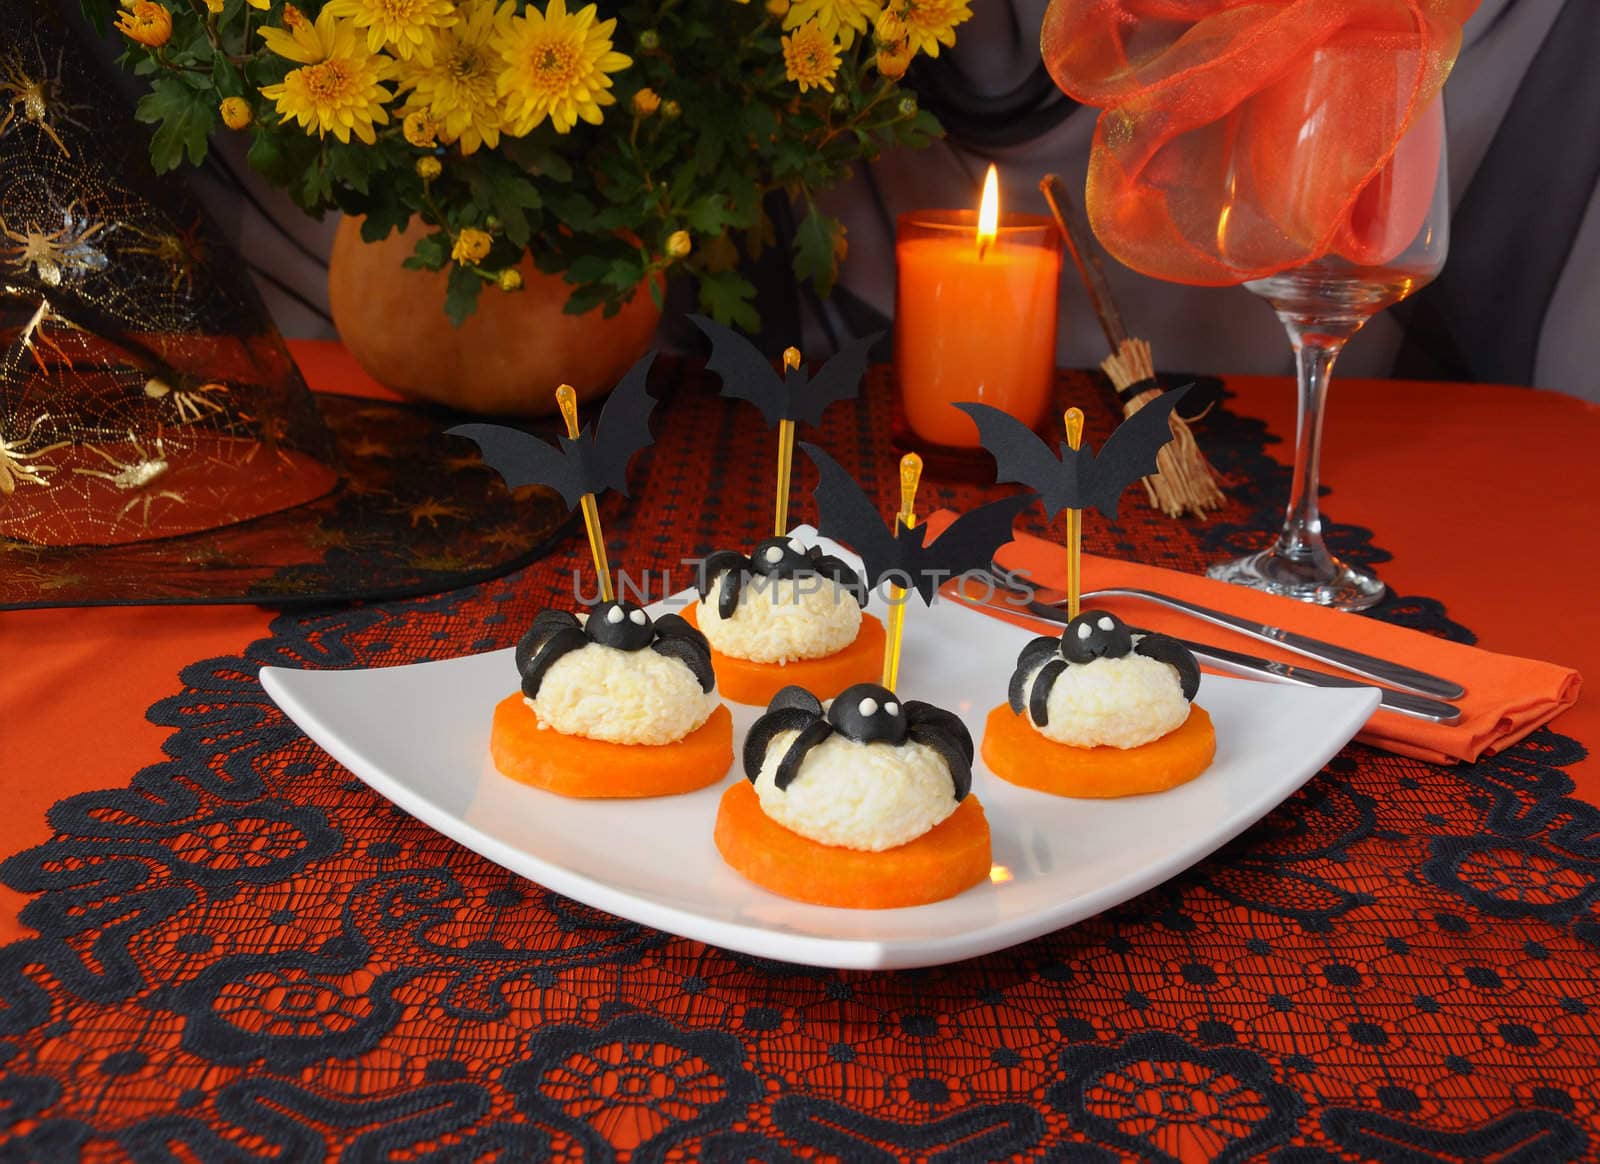 Cheese balls for Halloween by Apolonia